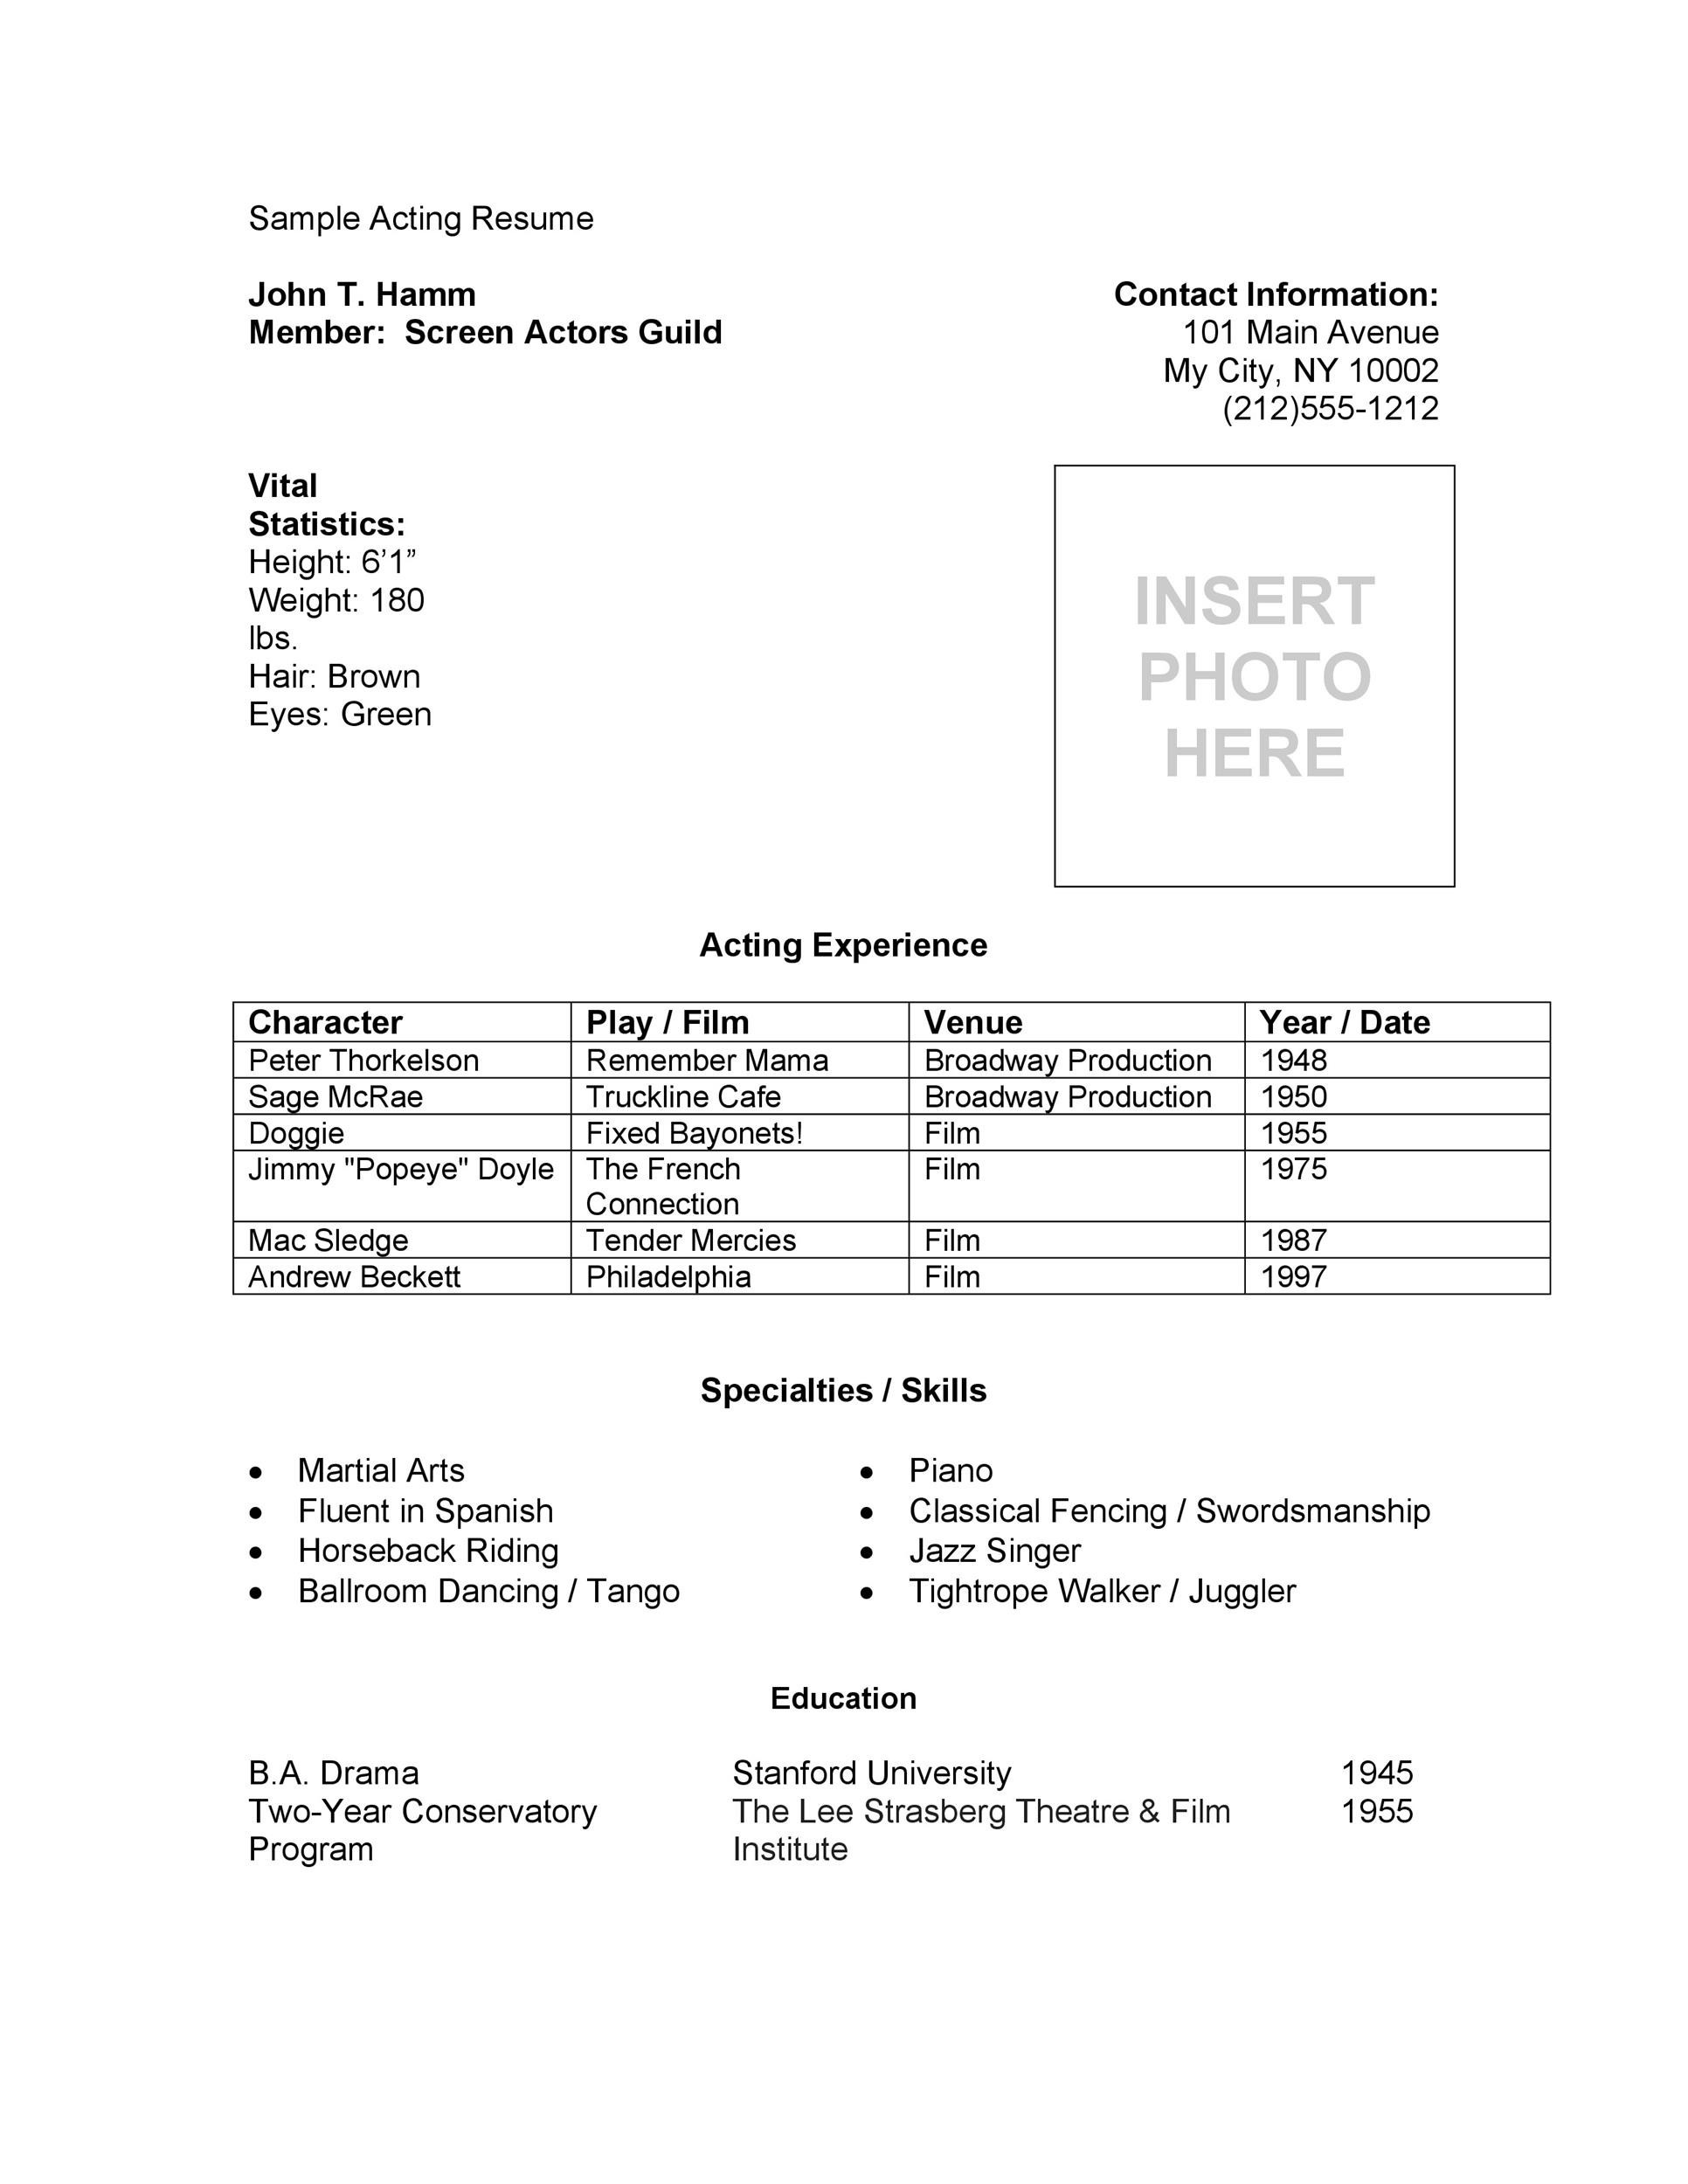 Free acting resume template 14